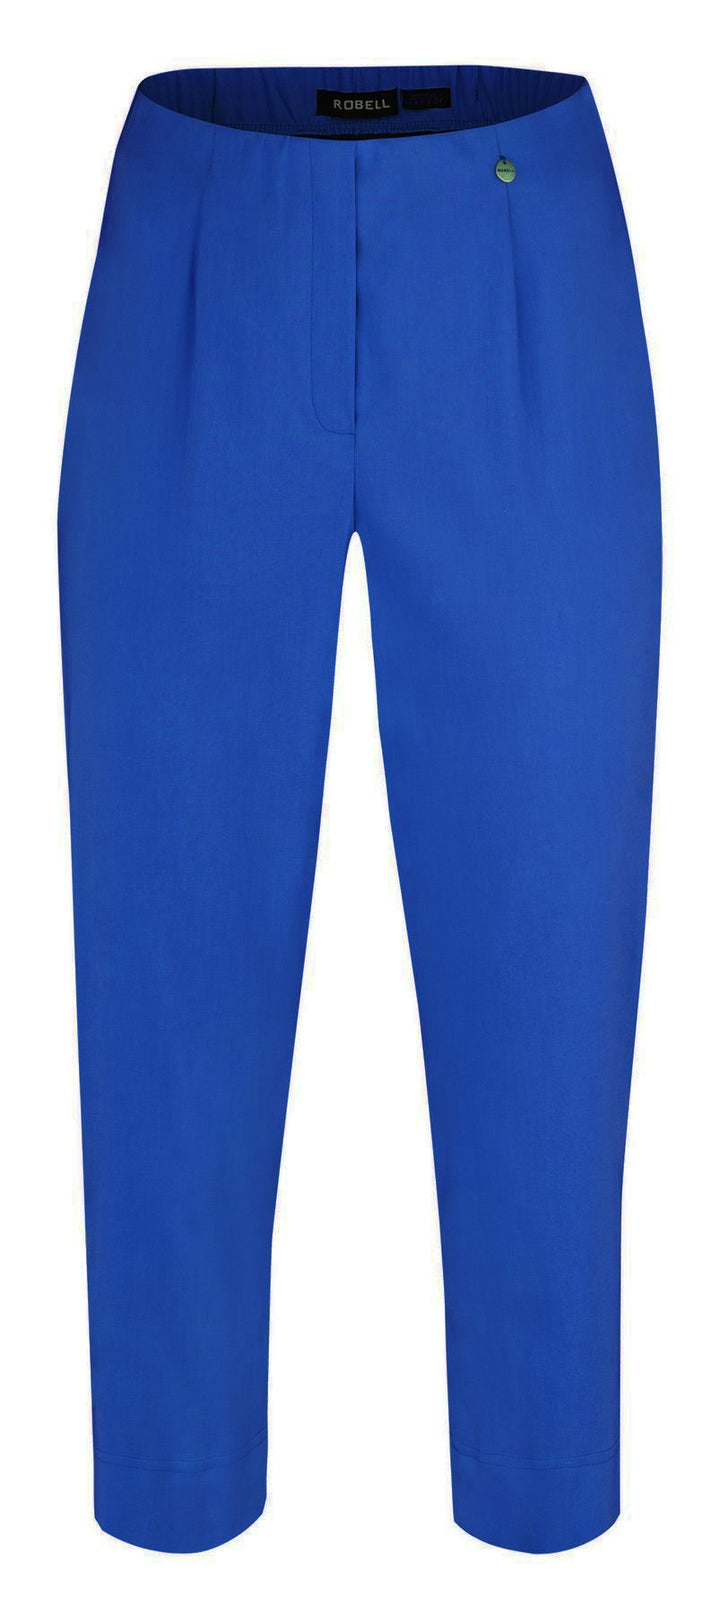 SKY BLUE MARIE 07 CROPPED TROUSERS